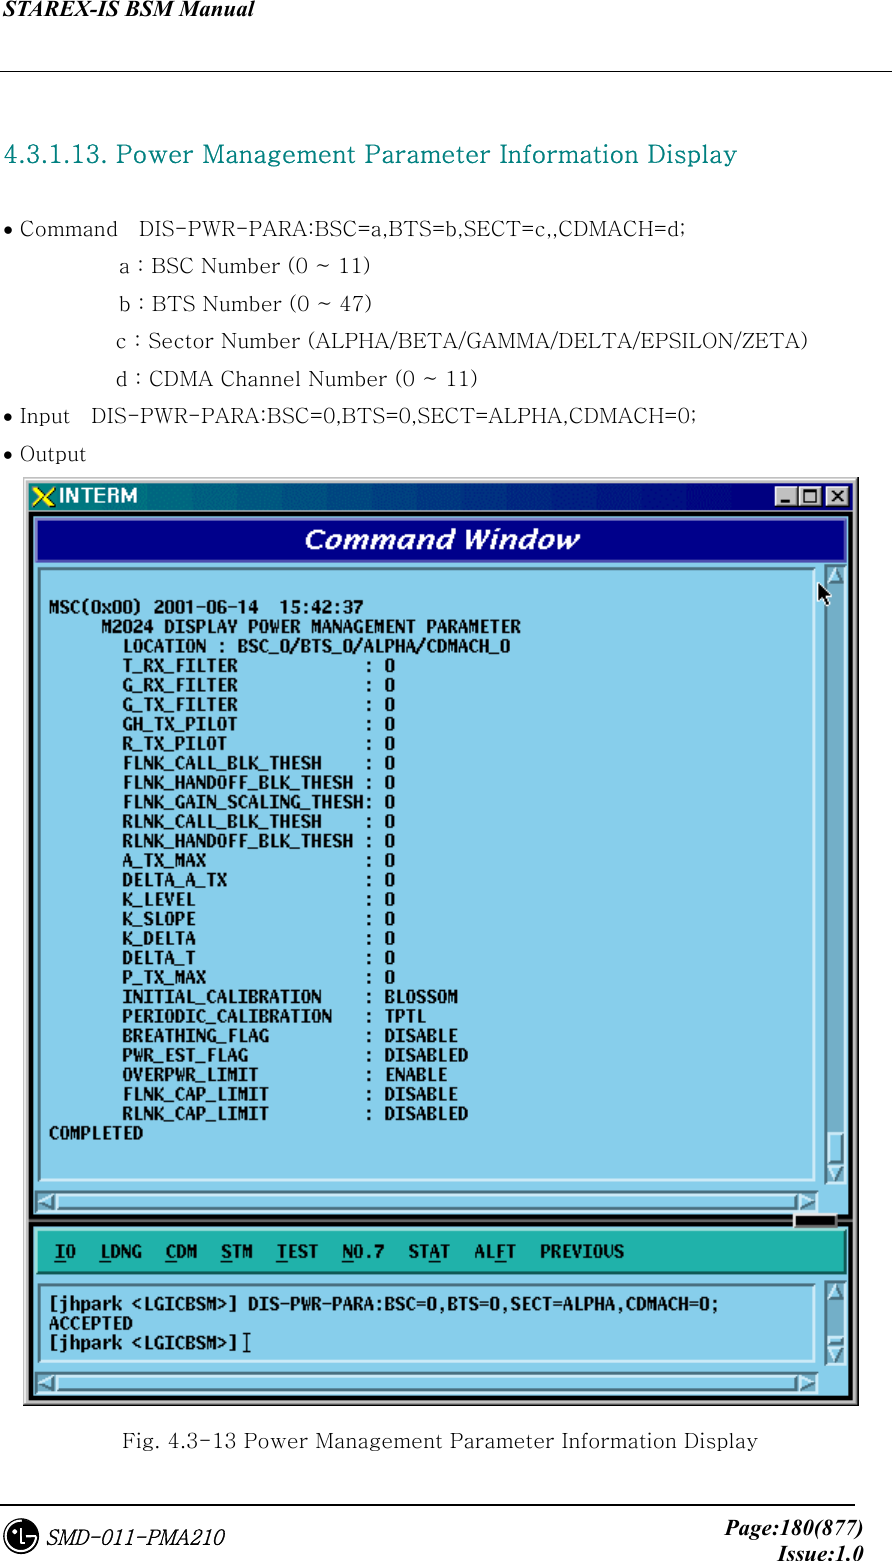 STAREX-IS BSM Manual     Page:180(877)Issue:1.0SMD-011-PMA210  4.3.1.13. Power Management Parameter Information Display  • Command    DIS-PWR-PARA:BSC=a,BTS=b,SECT=c,,CDMACH=d;            a : BSC Number (0 ~ 11)            b : BTS Number (0 ~ 47) c : Sector Number (ALPHA/BETA/GAMMA/DELTA/EPSILON/ZETA) d : CDMA Channel Number (0 ~ 11) • Input    DIS-PWR-PARA:BSC=0,BTS=0,SECT=ALPHA,CDMACH=0; • Output  Fig. 4.3-13 Power Management Parameter Information Display 